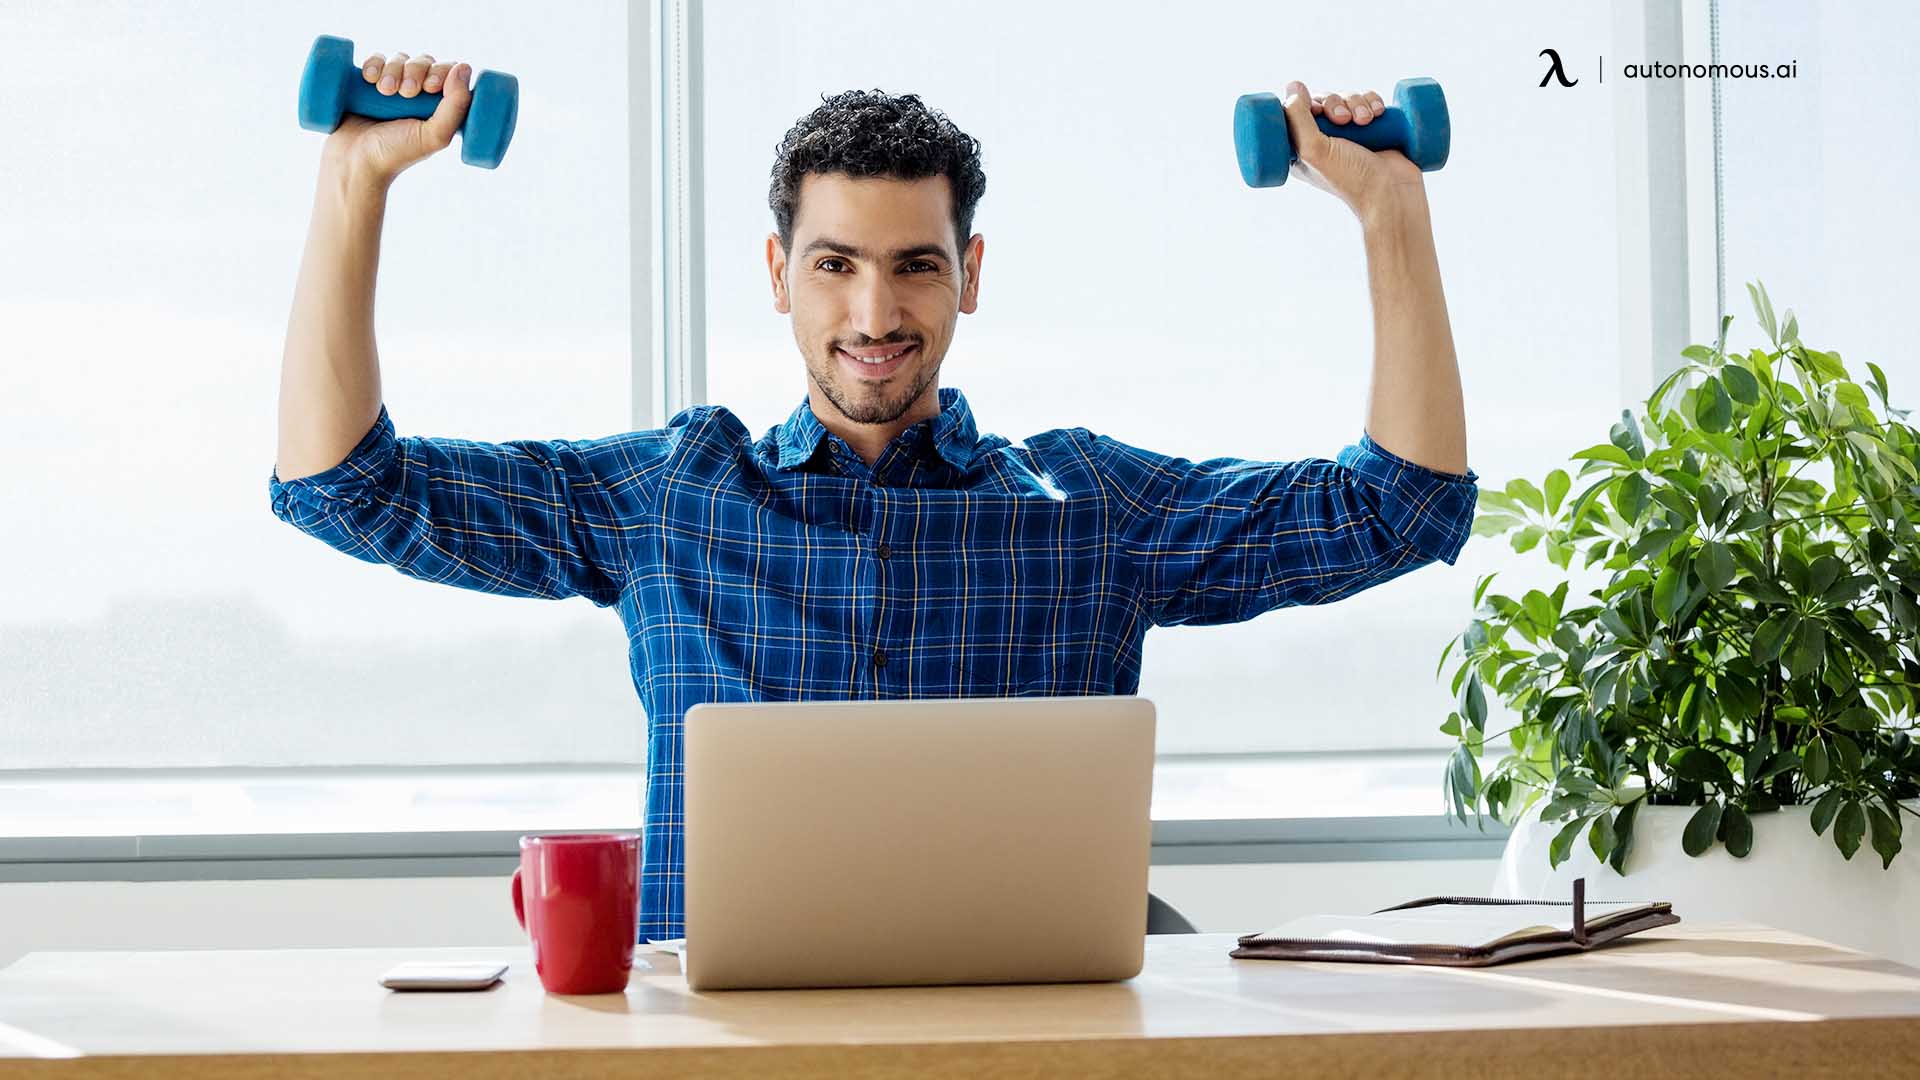 8 Best Office Desk Exercises Equipment to Help Stay Fit